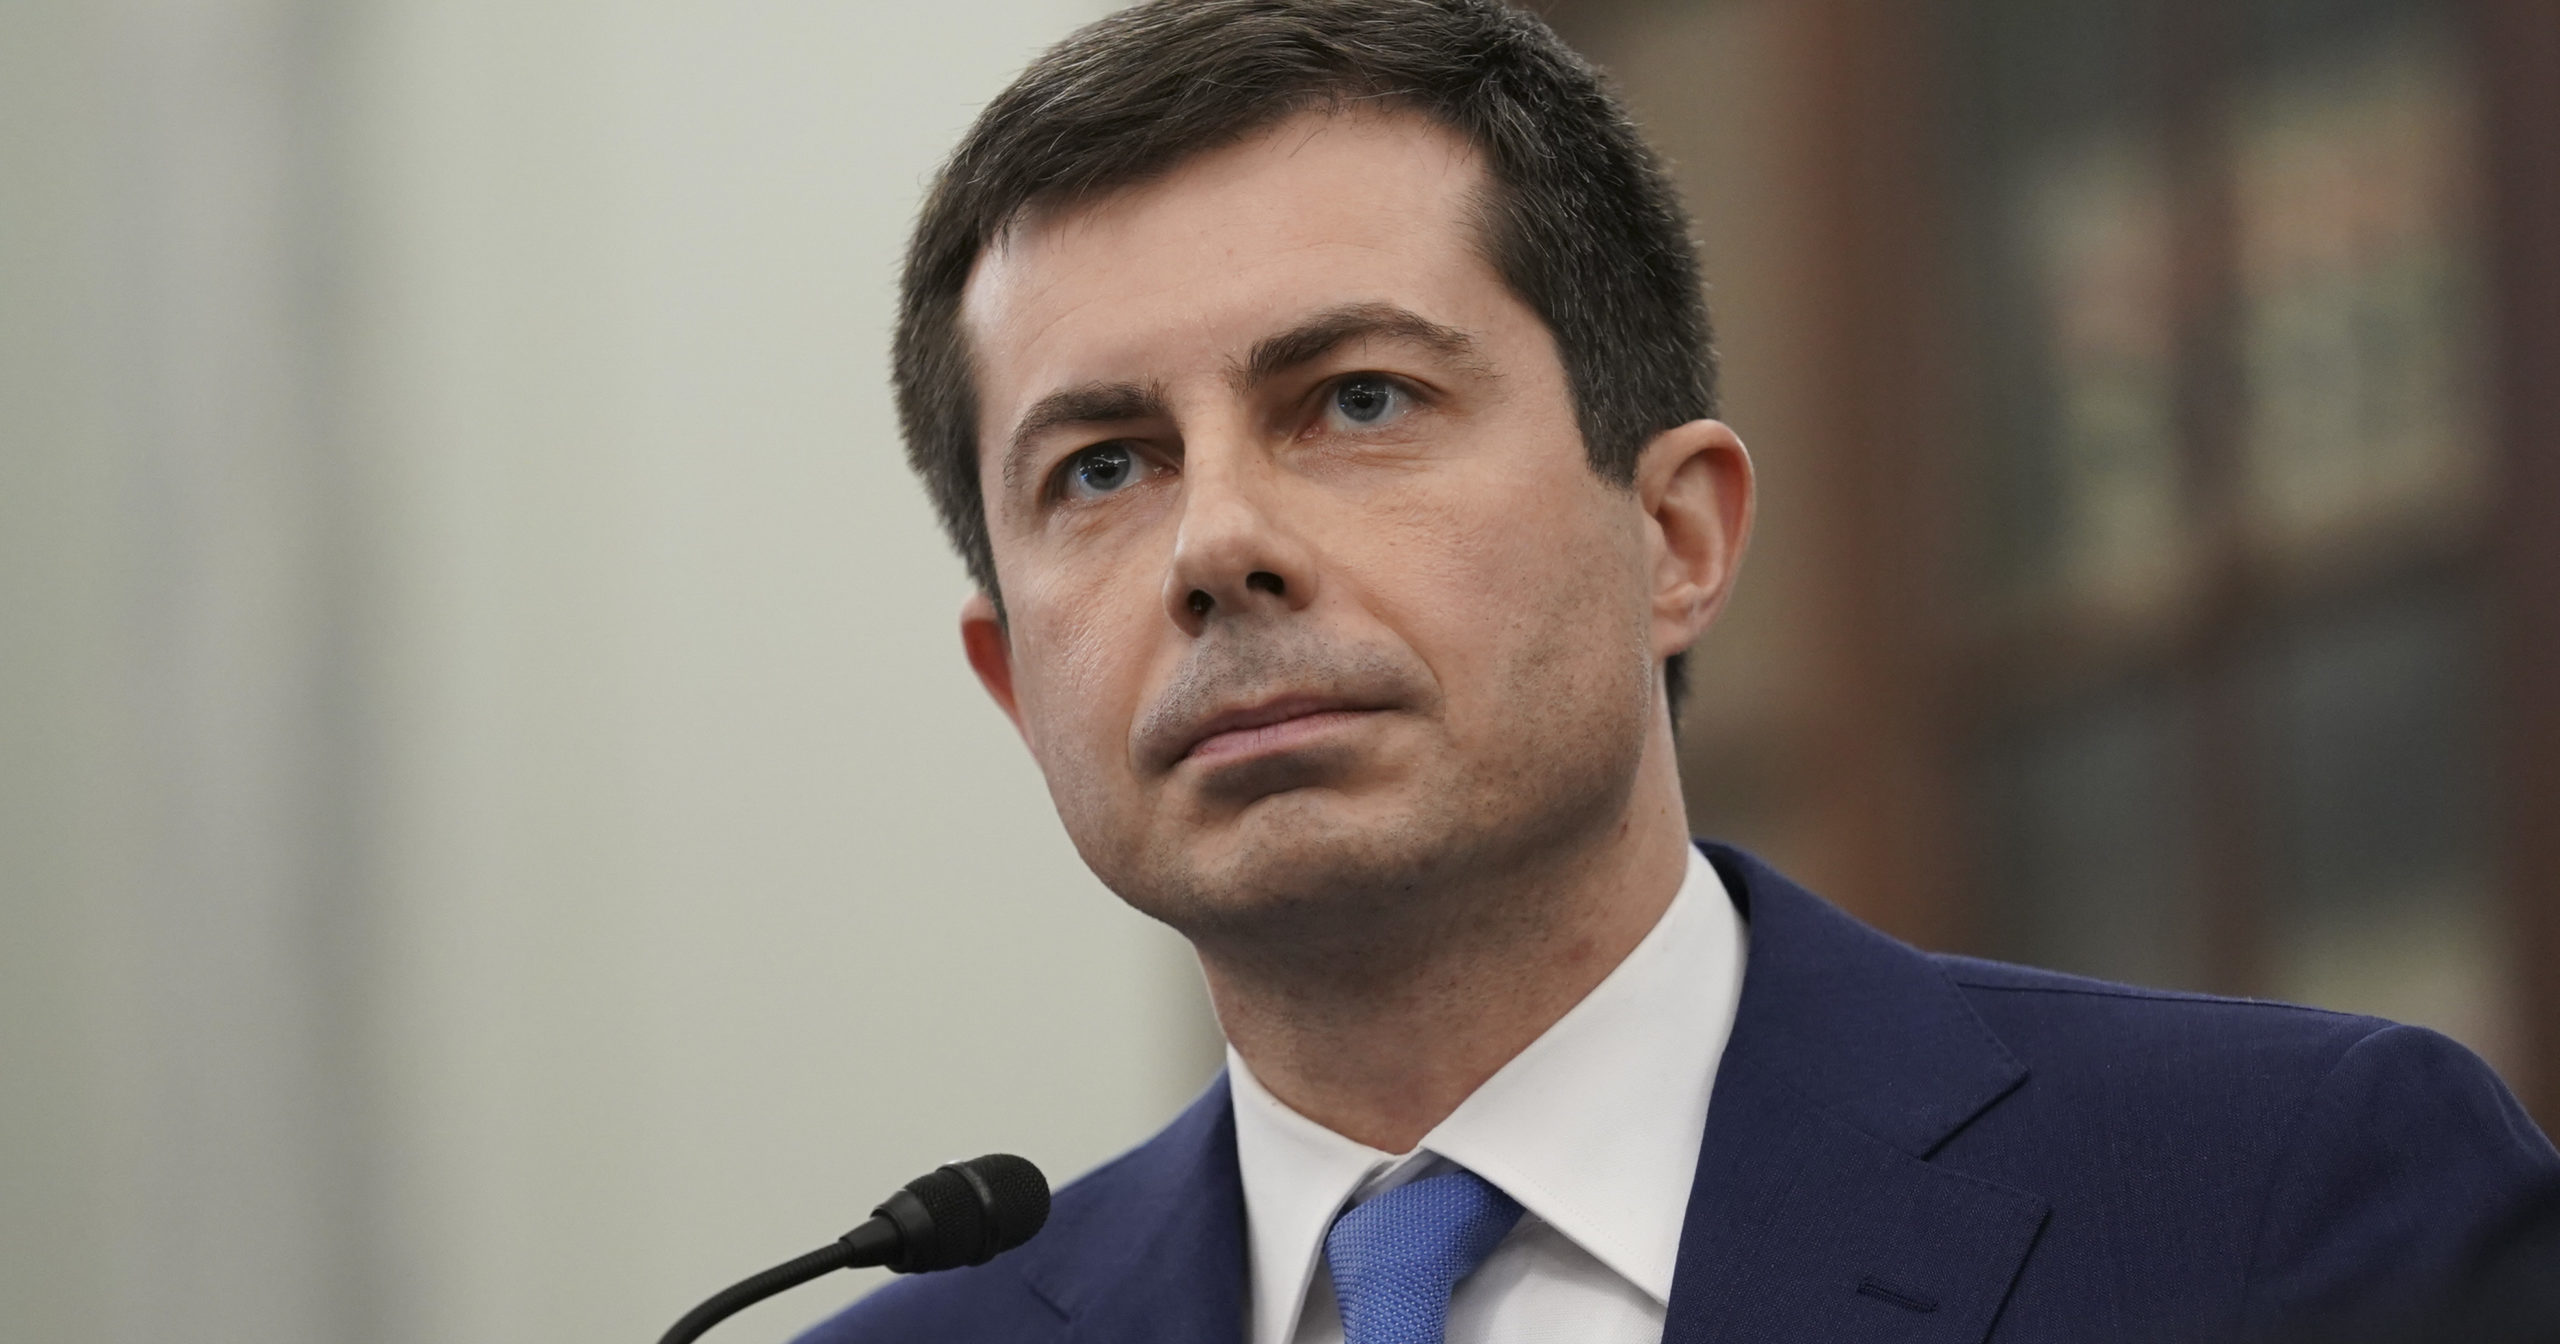 Pete Buttigieg speaks during a Senate Commerce, Science and Transportation Committee confirmation hearing on Capitol Hill in Washington, D.C., on Jan. 21, 2021.